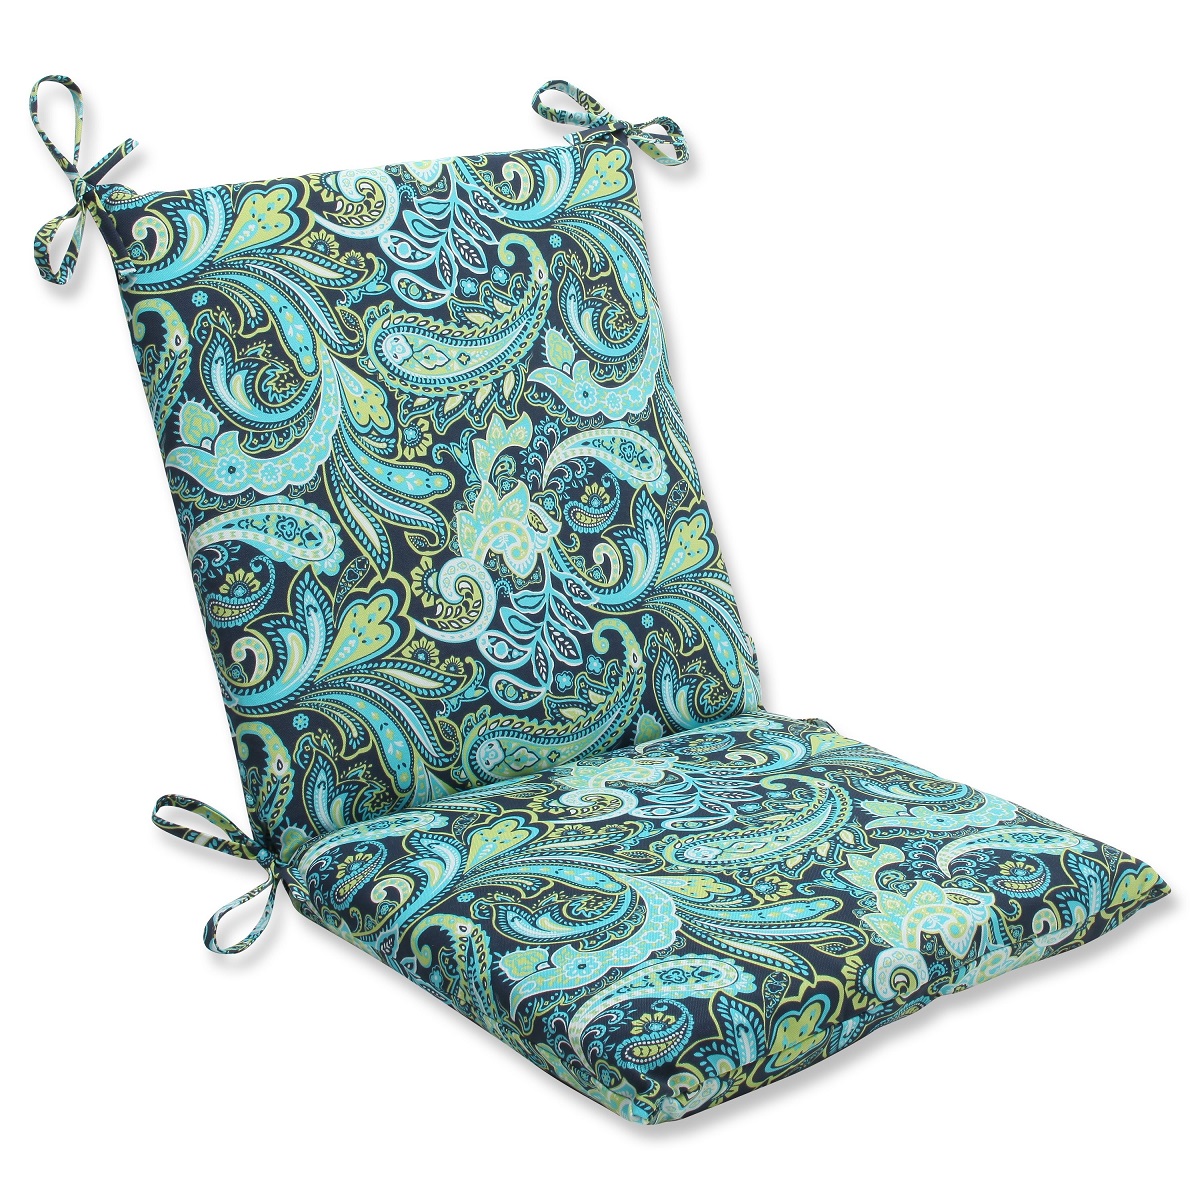 Pillow Perfect 36.5" Blue and Green Paisley Outdoor Patio Chair Cushion